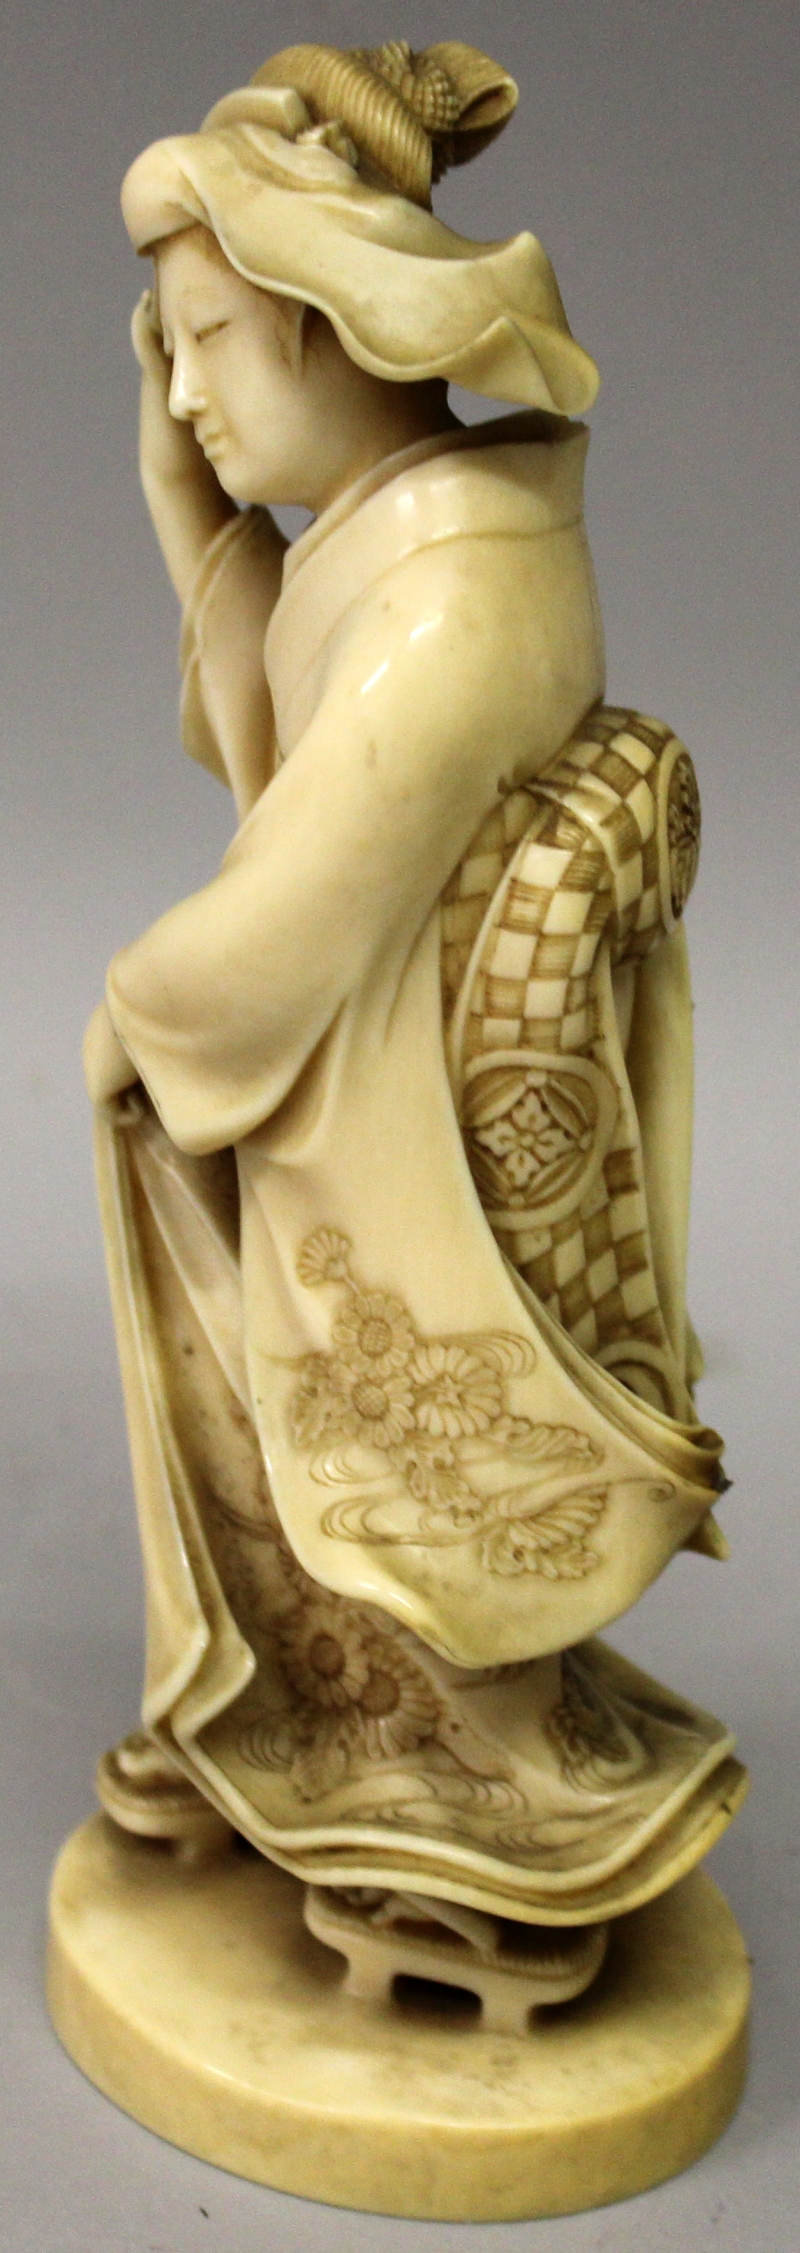 A GOOD QUALITY SIGNED JAPANESE MEIJI PERIOD IVORY OKIMONO OF A BIJIN, walking on geta in floral - Image 4 of 7